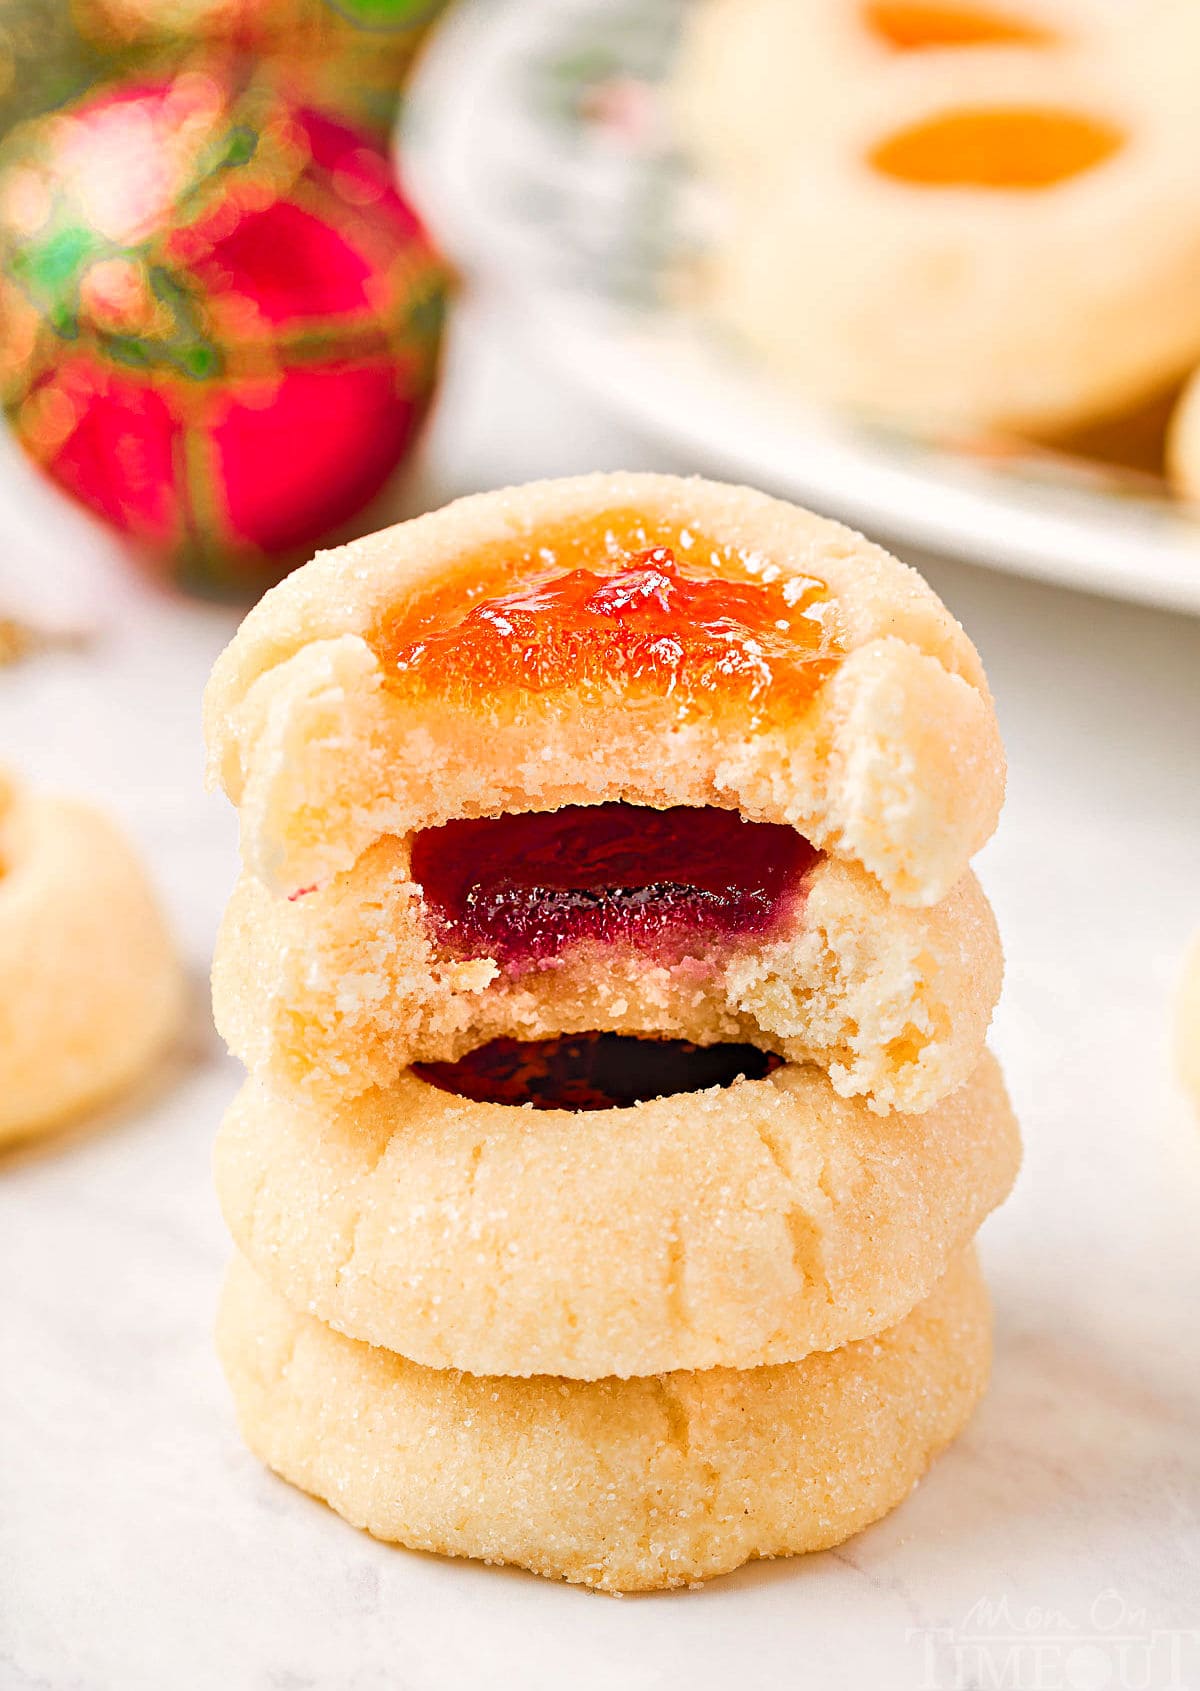 four cookies stacked with jam centers. top two cookies have bites taken out of them.